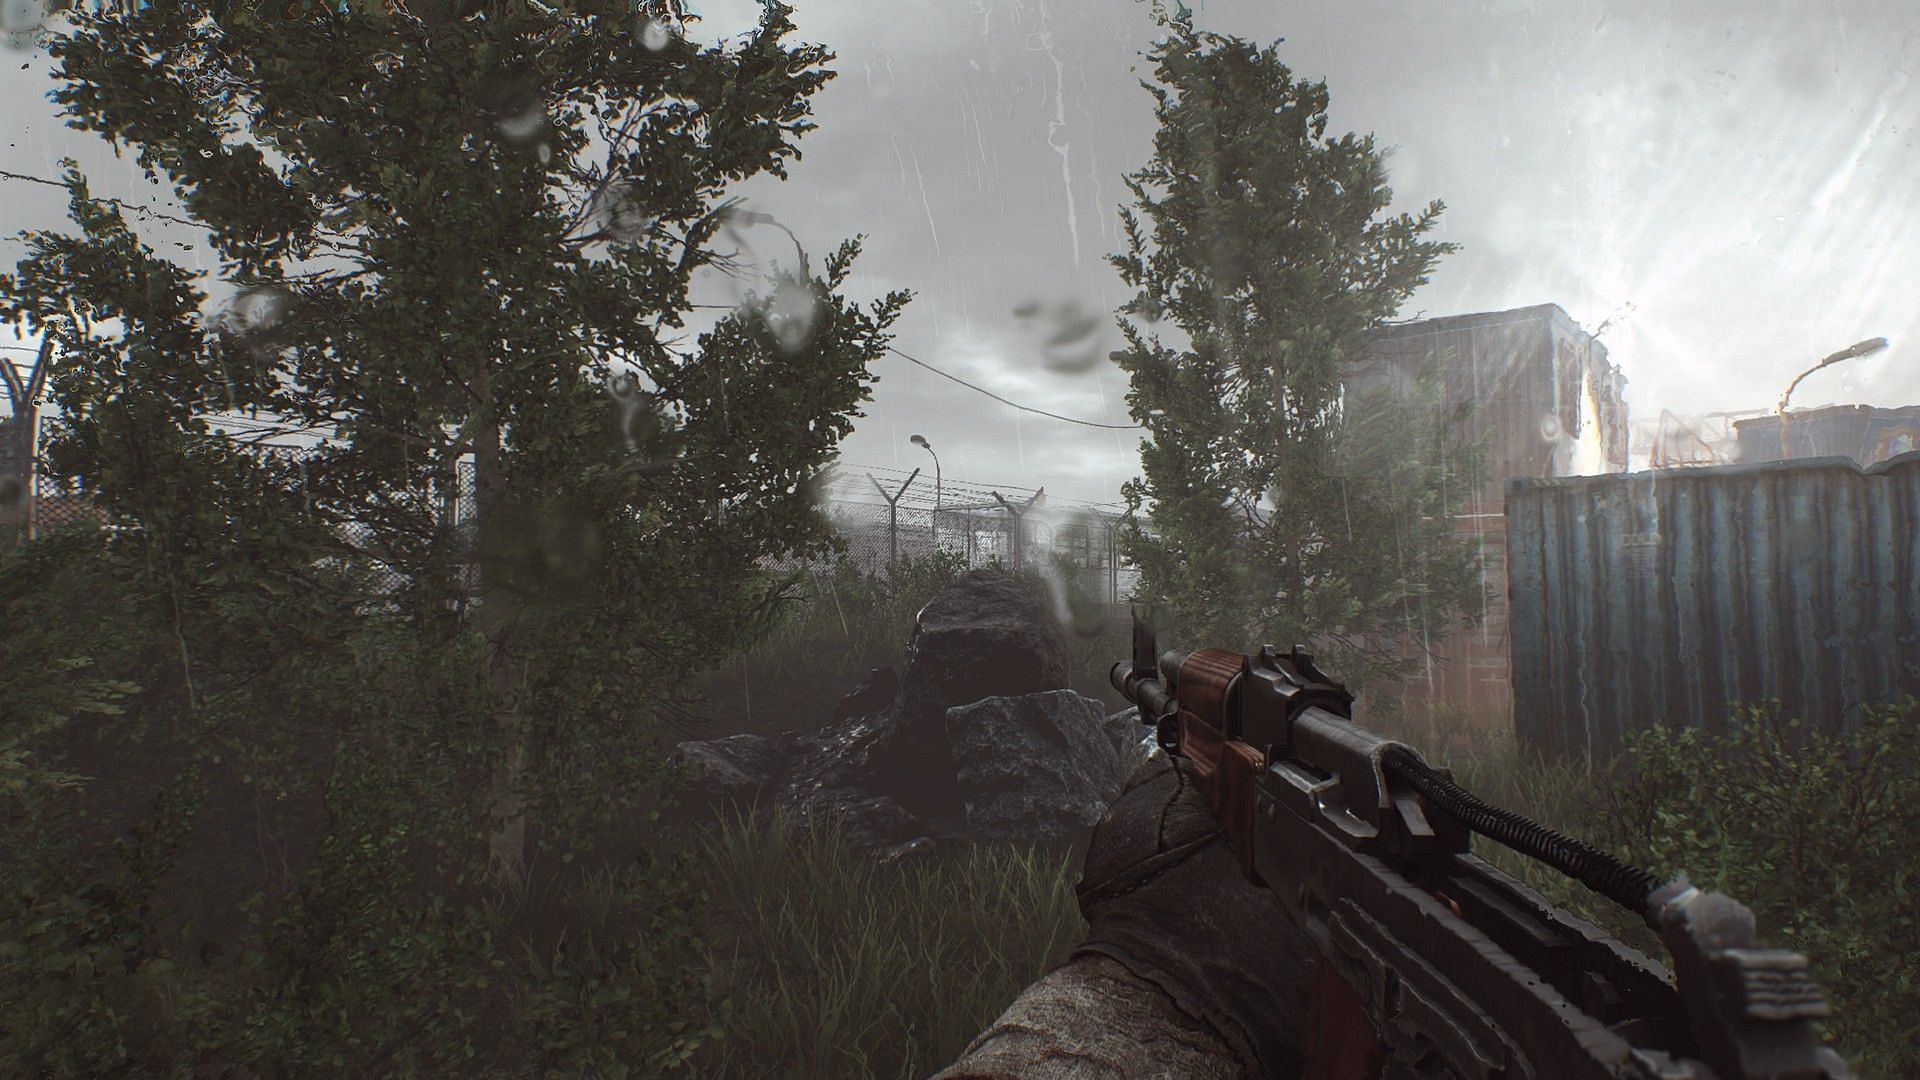 Battlestate Games releases new screenshots for Escape from Tarkov